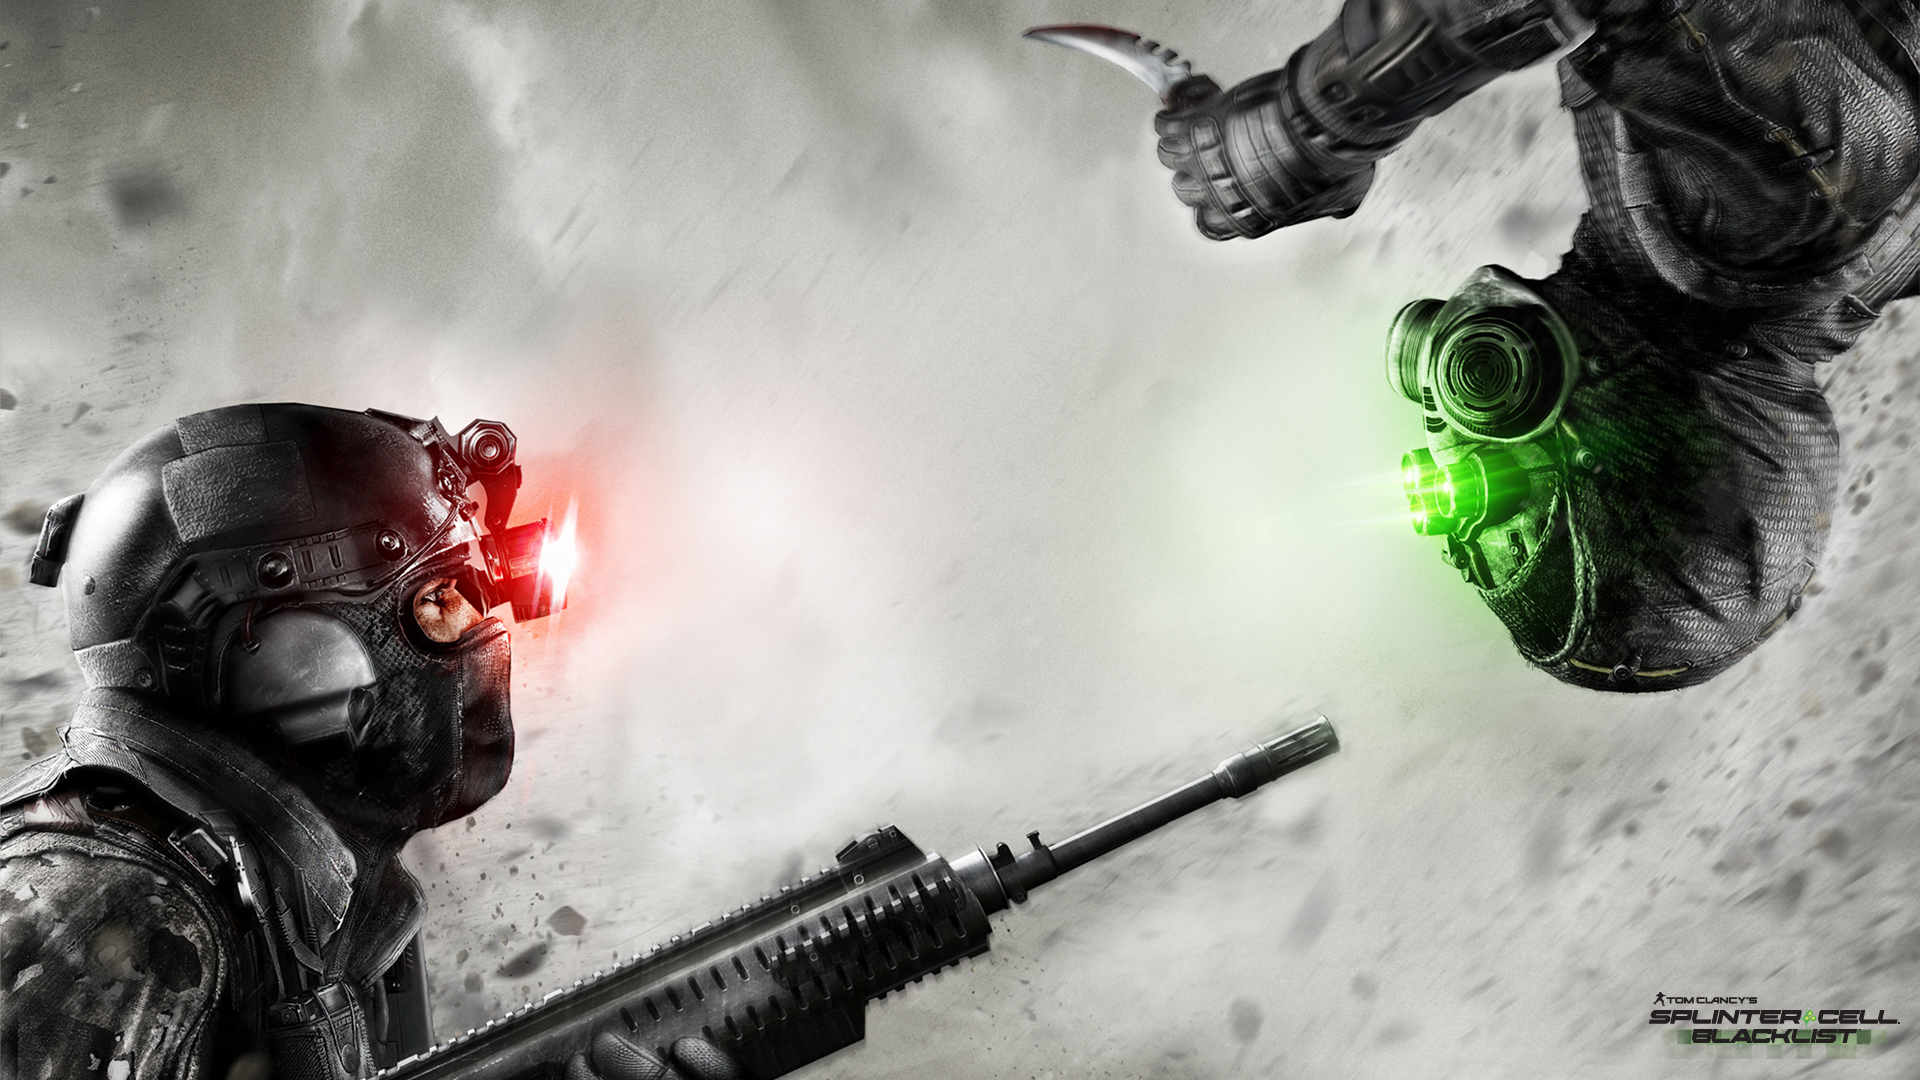 Two wallpapers from video game Splinter Cell:Blacklist